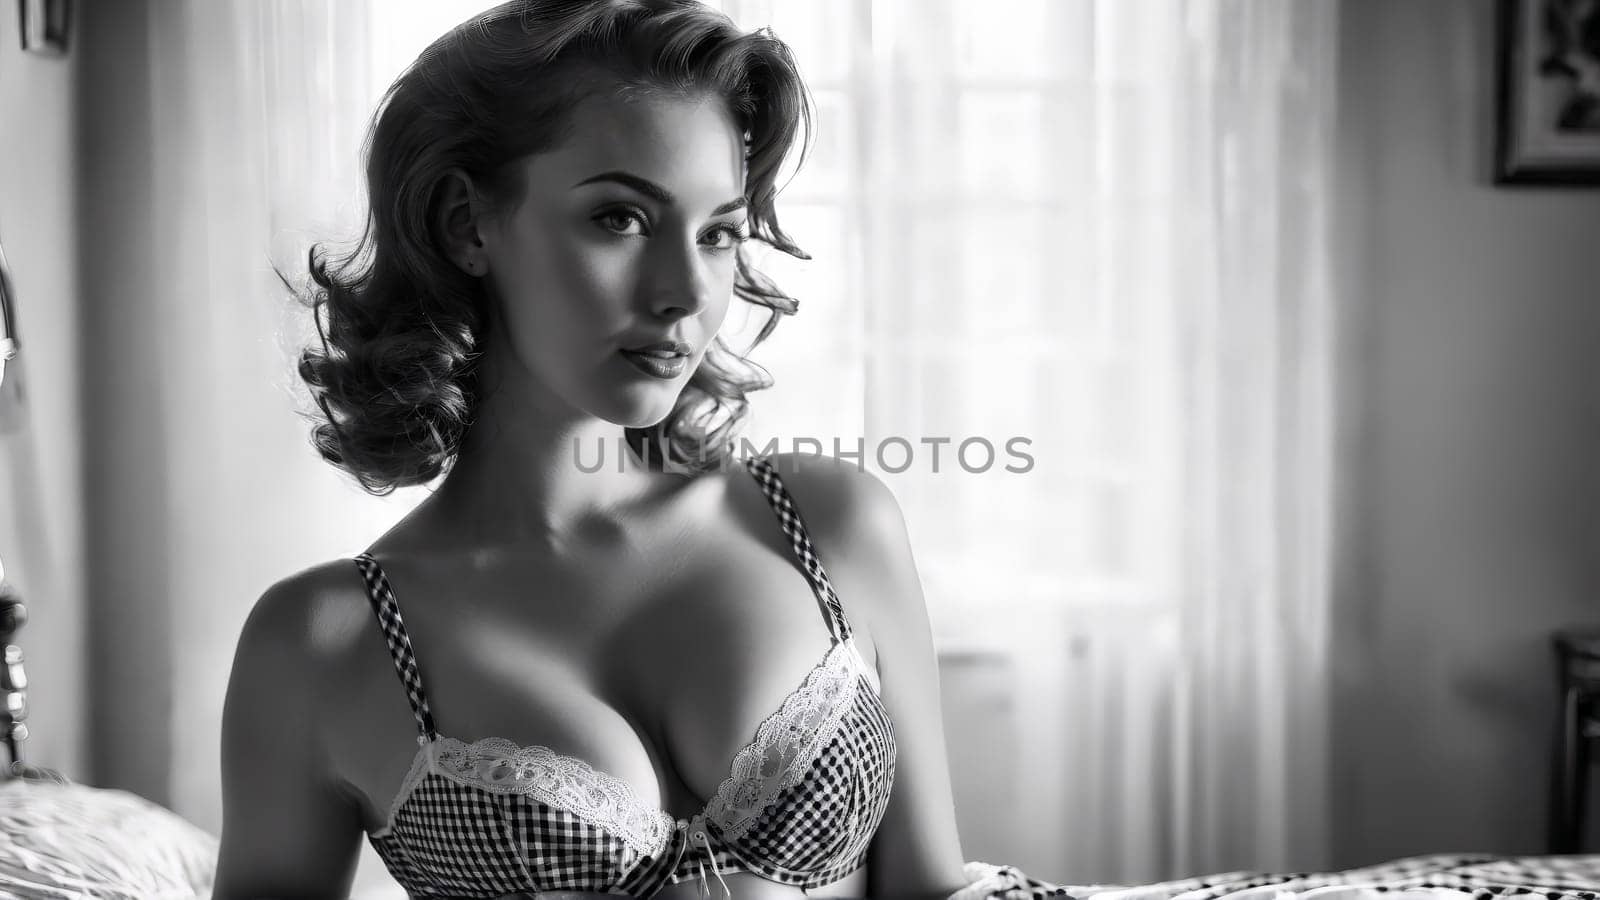 Woman black and white gingham lingerie set retro vibe pin up style bright cheerful lighting.